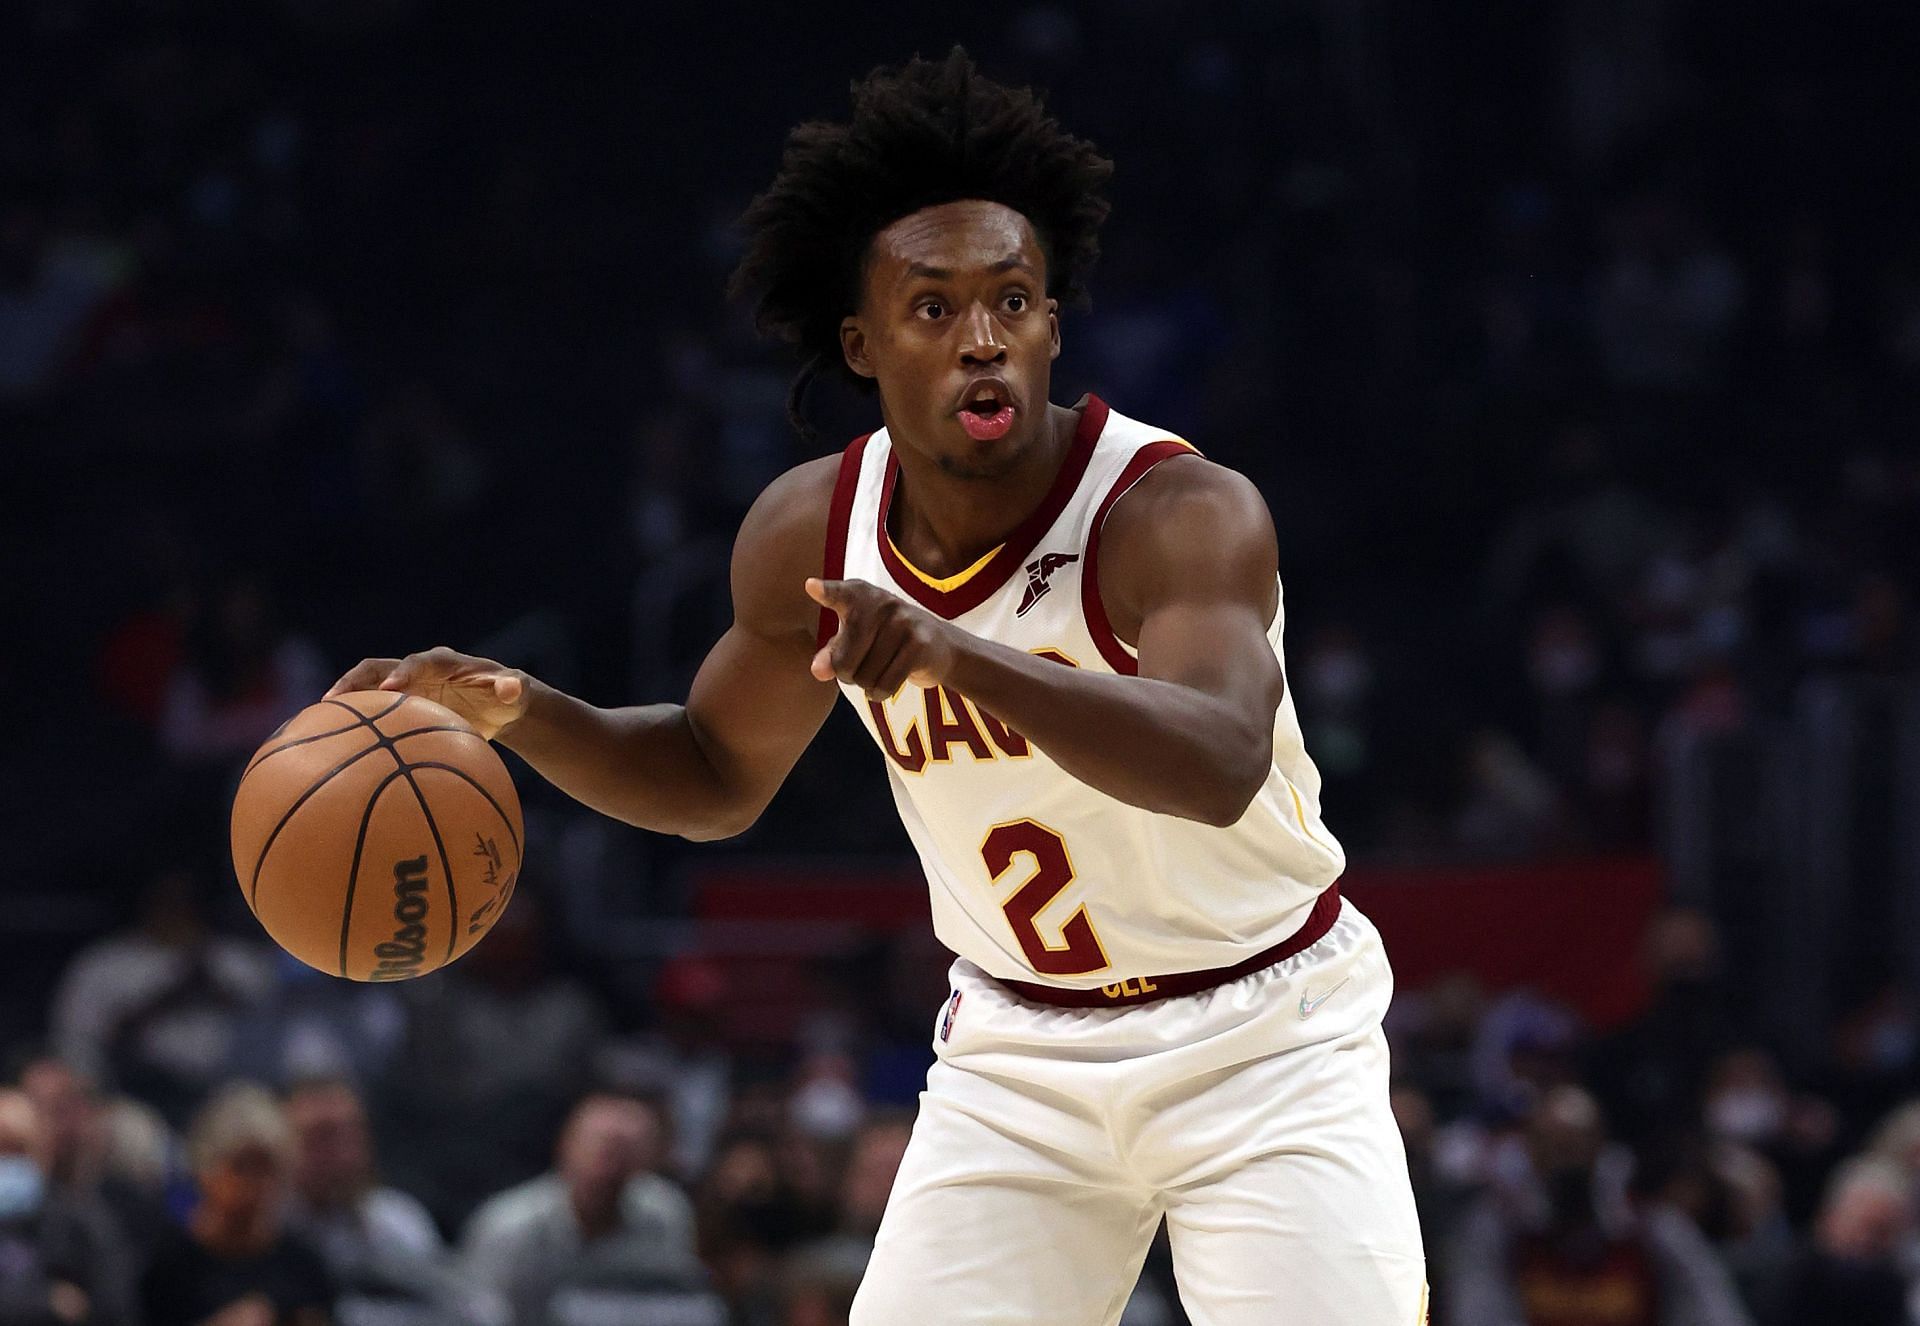 Collin Sexton of the Cleveland Cavaliers.